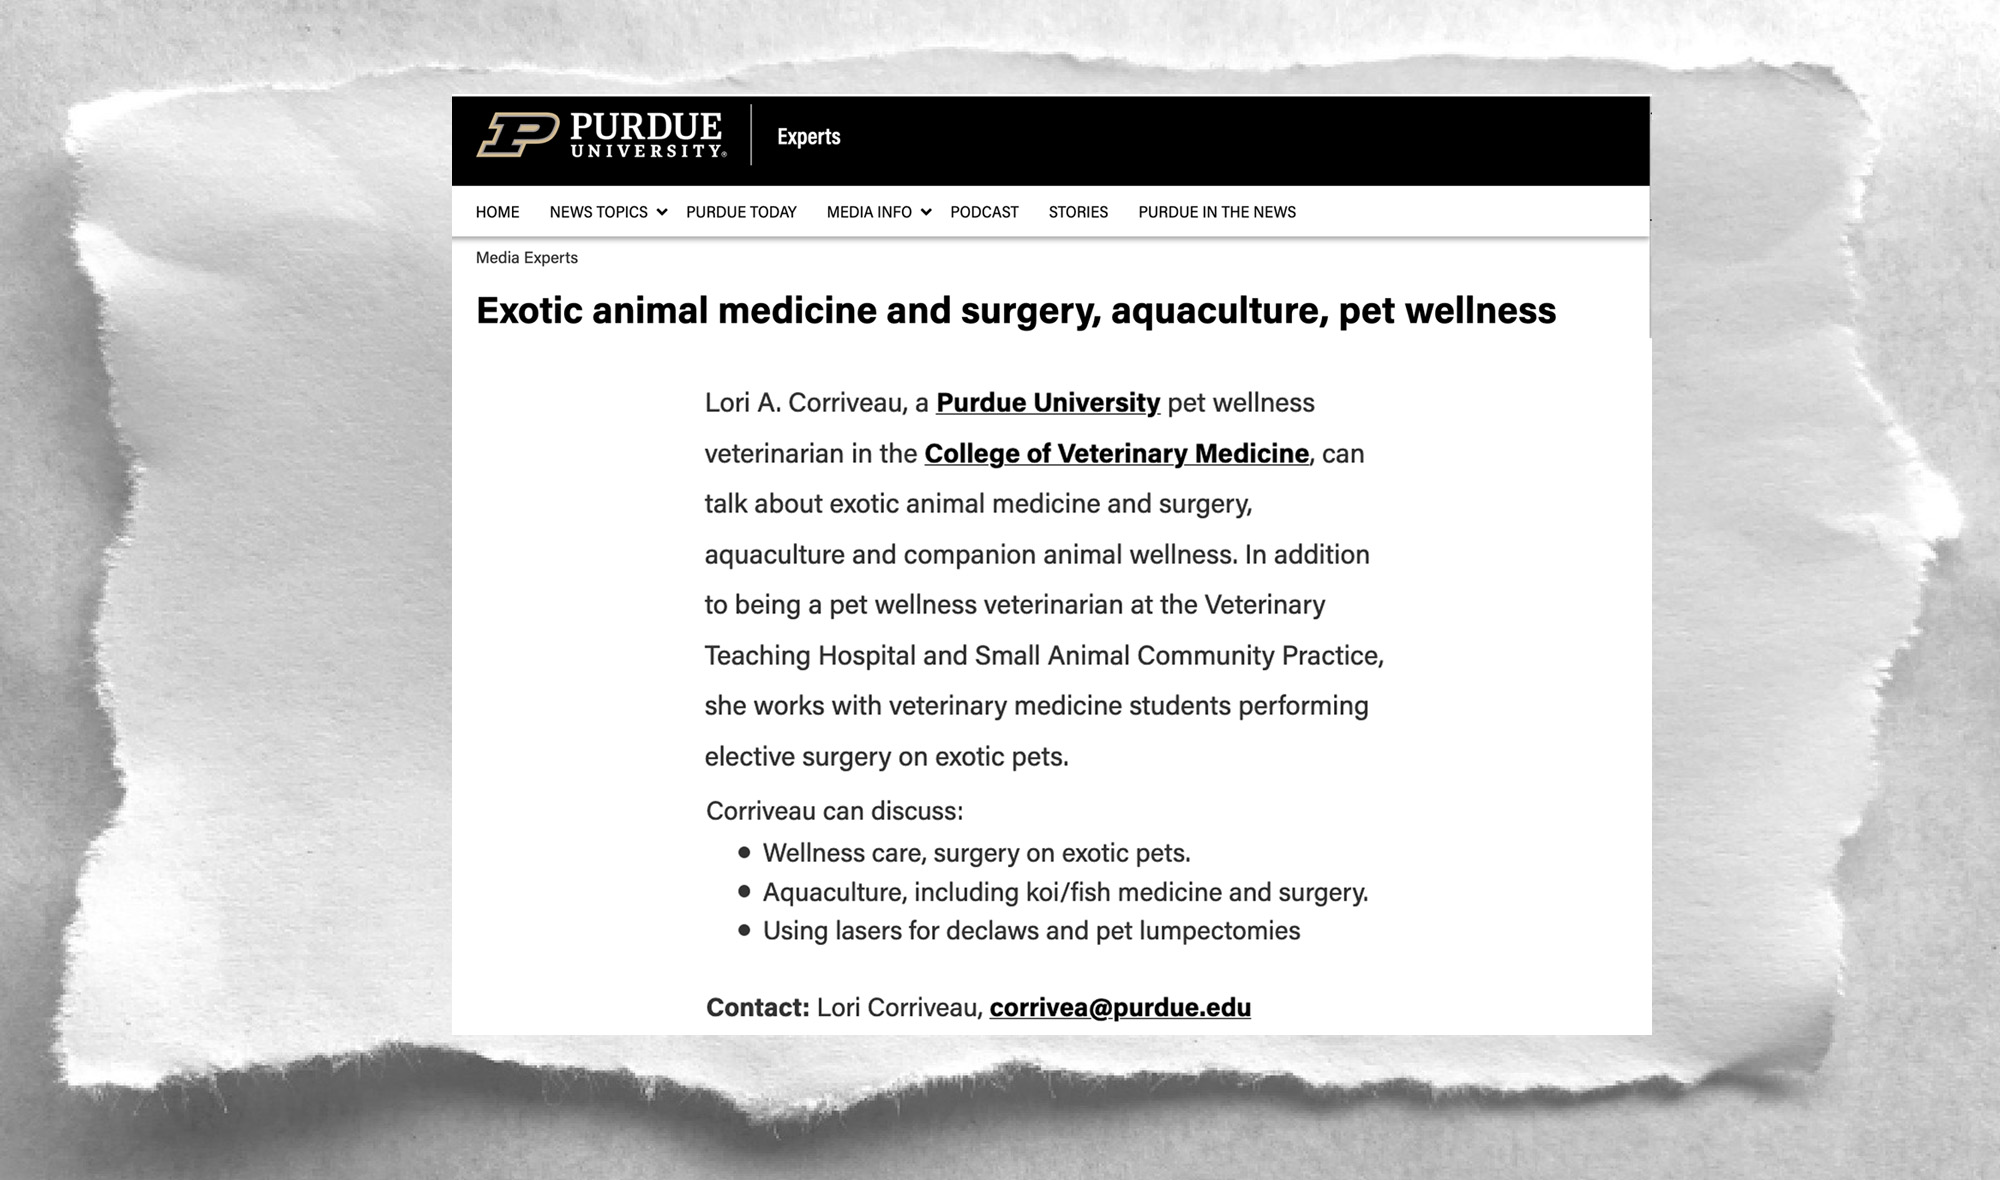 Is Purdue's Laser Declawing Veterinarian Getting Paid By A Laser Company? -  City the Kitty - Official